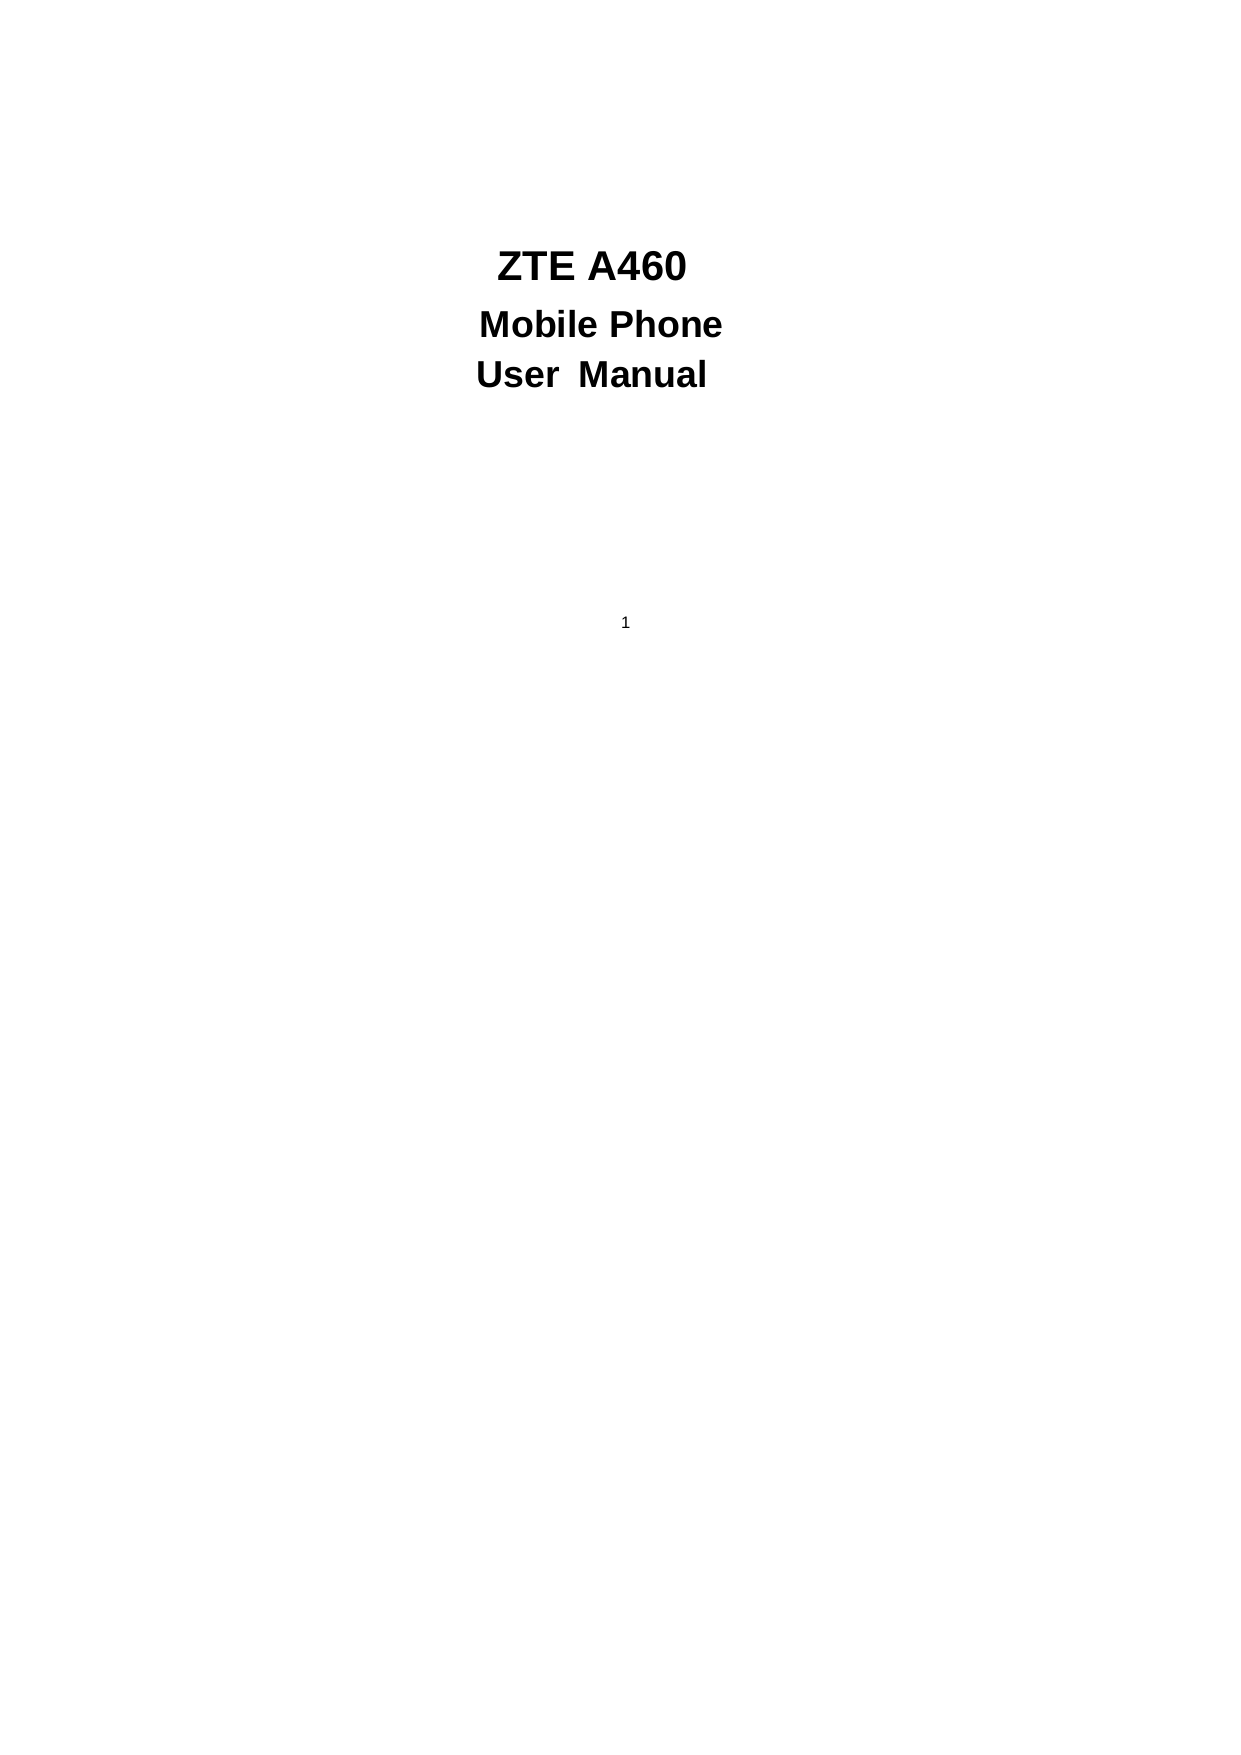 1     ZTE A460  Mobile Phone User Manual   